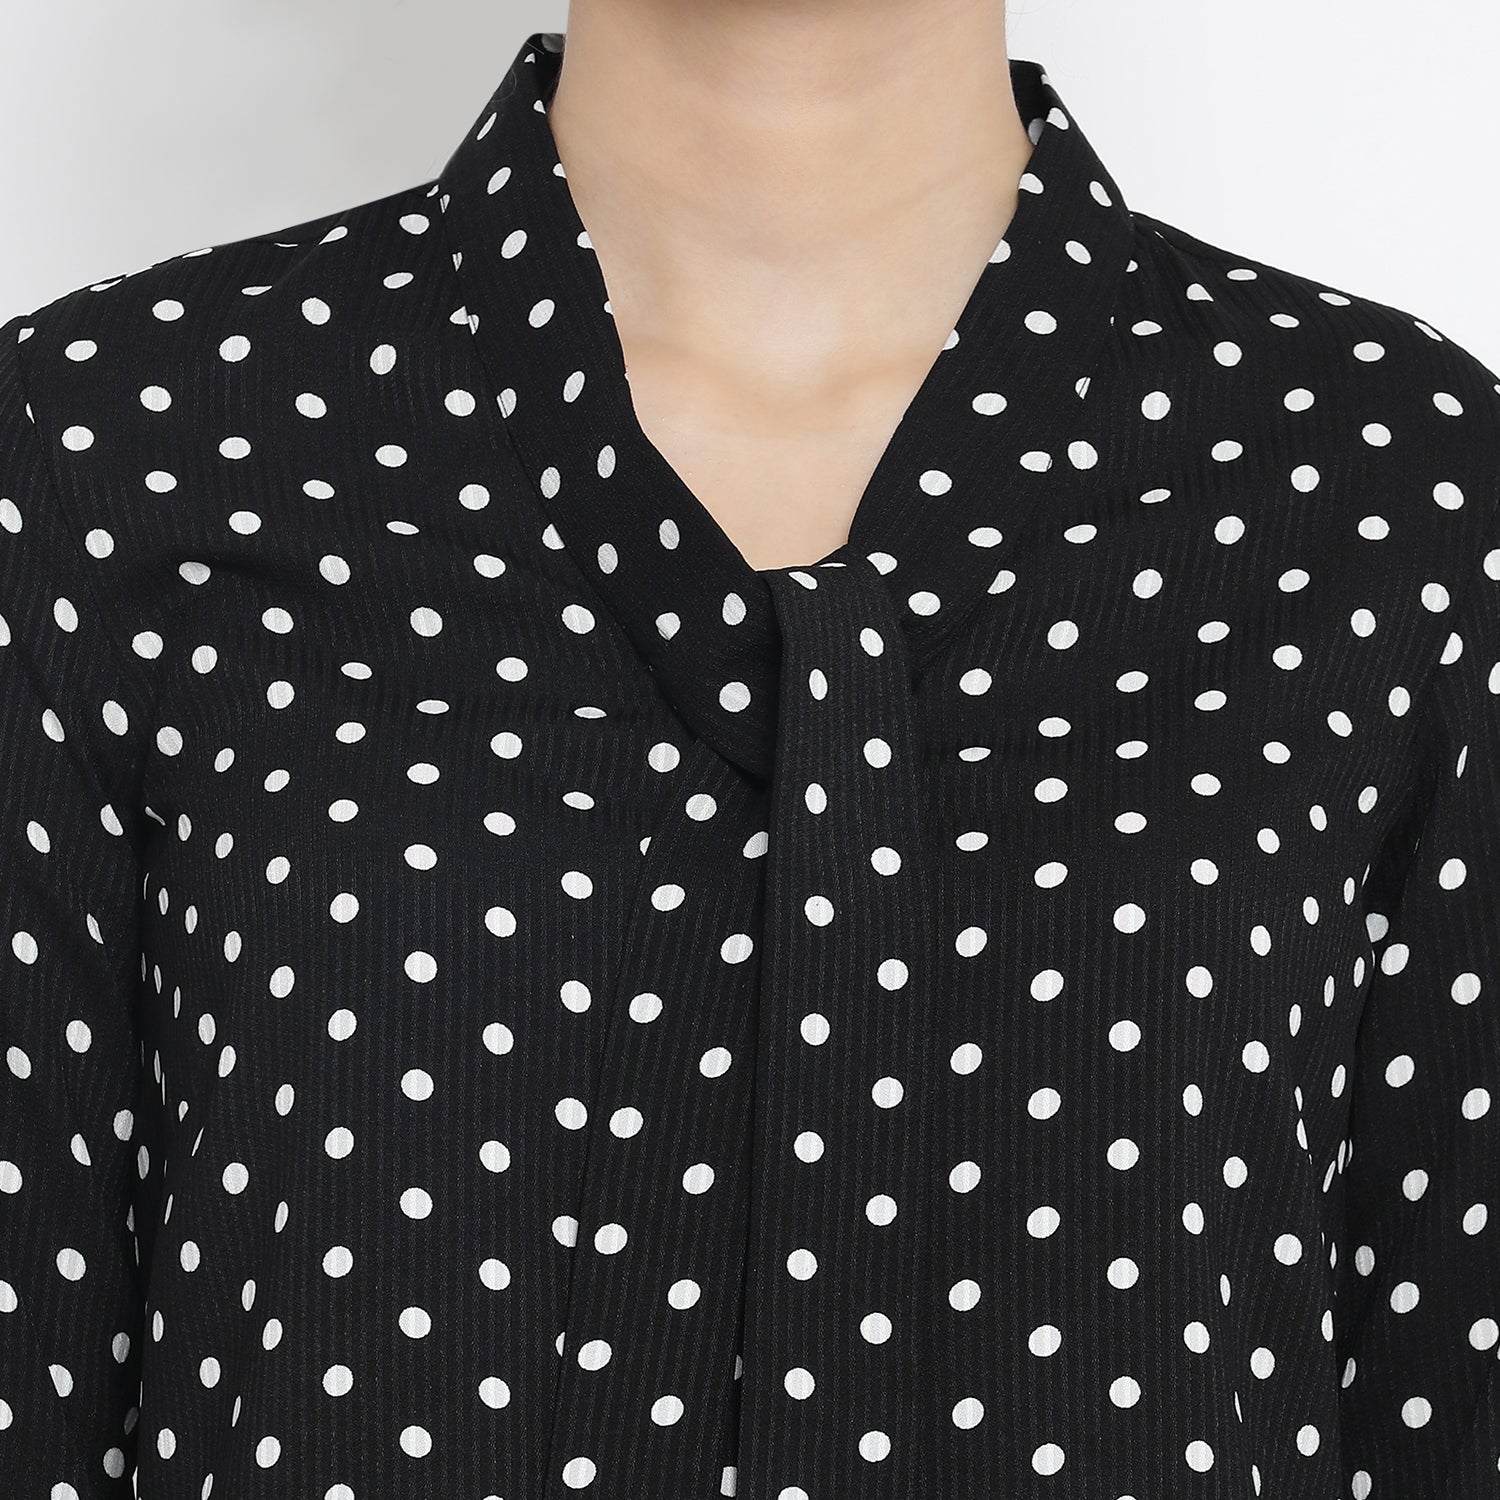 Black And White Polka Top With Tie Knot